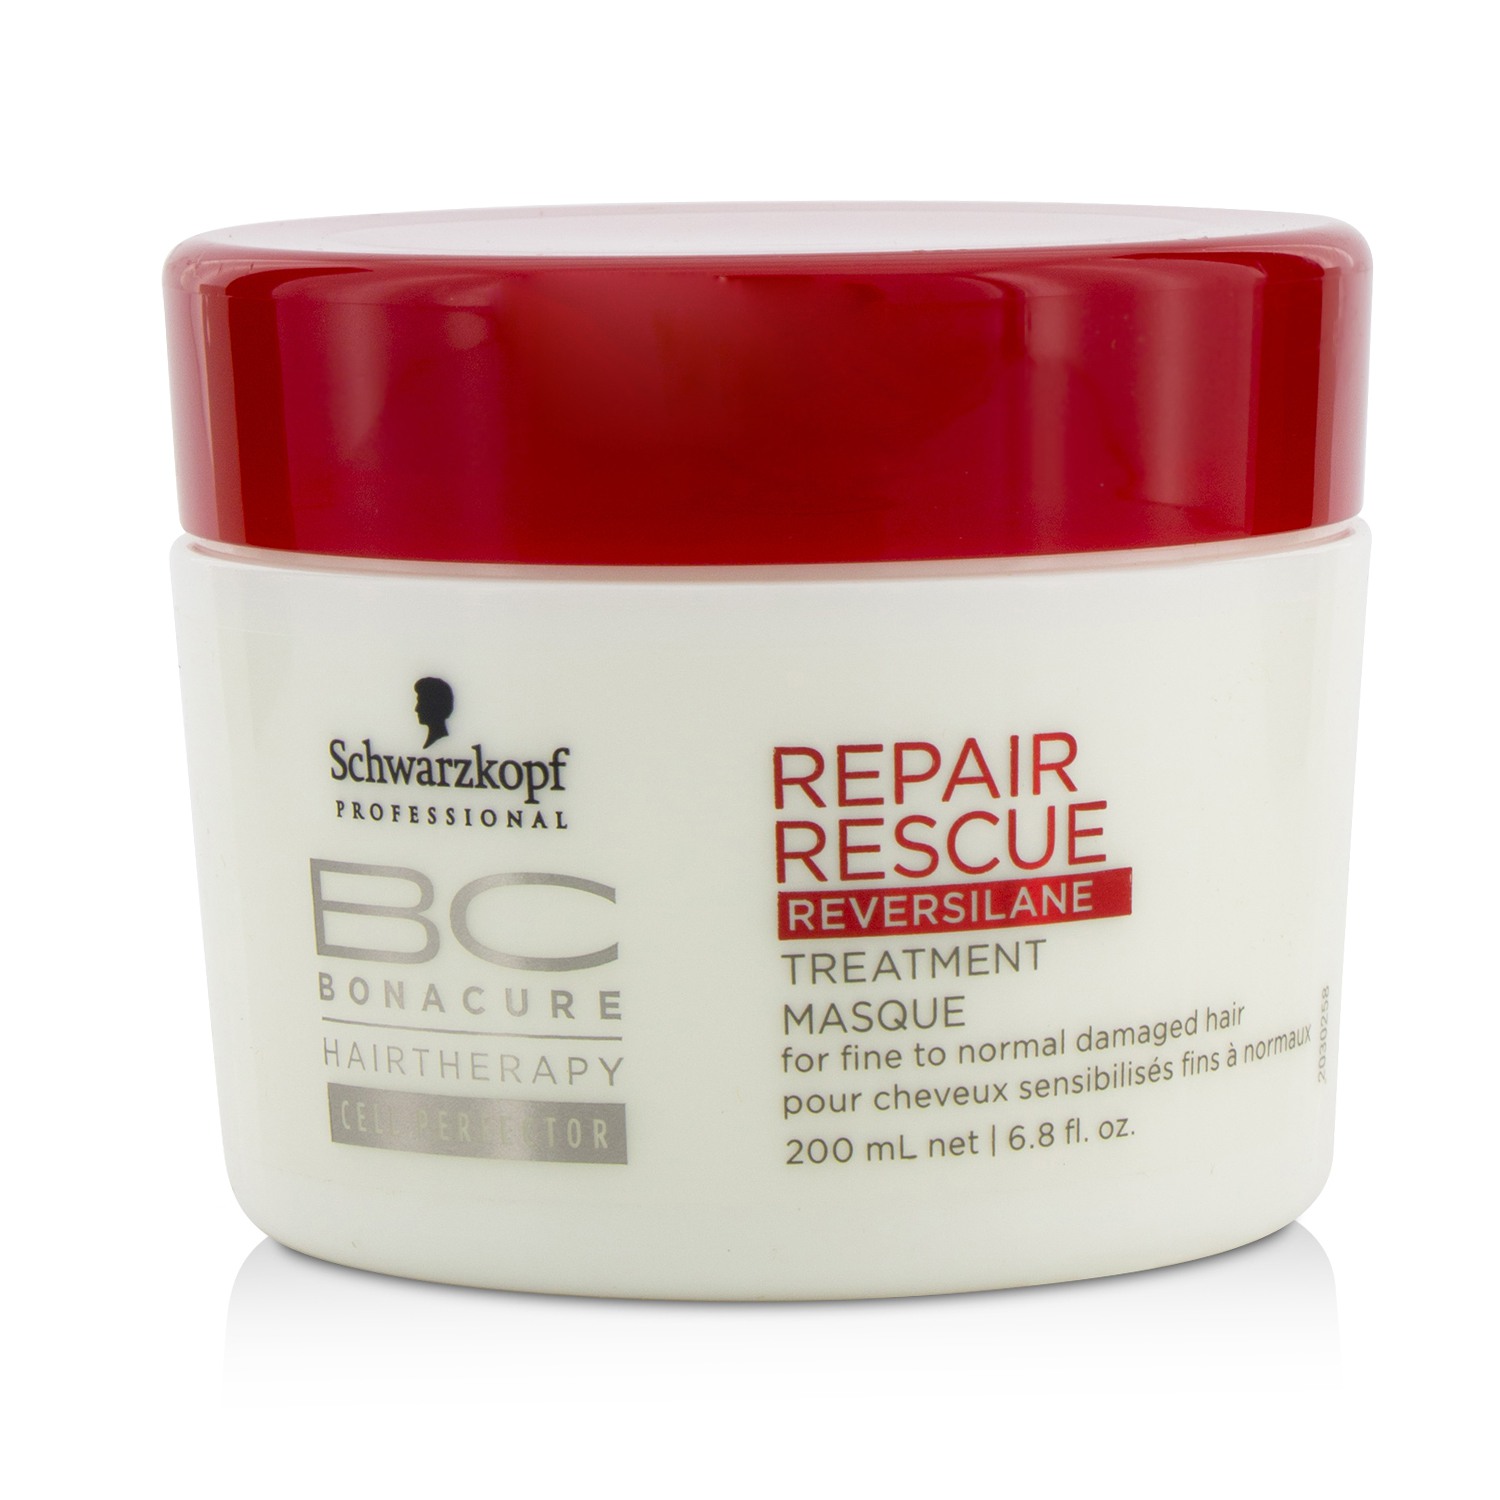 BC Repair Rescue Reversilane Treatment Masque (For Fine to Normal Damaged Hair) Schwarzkopf Image